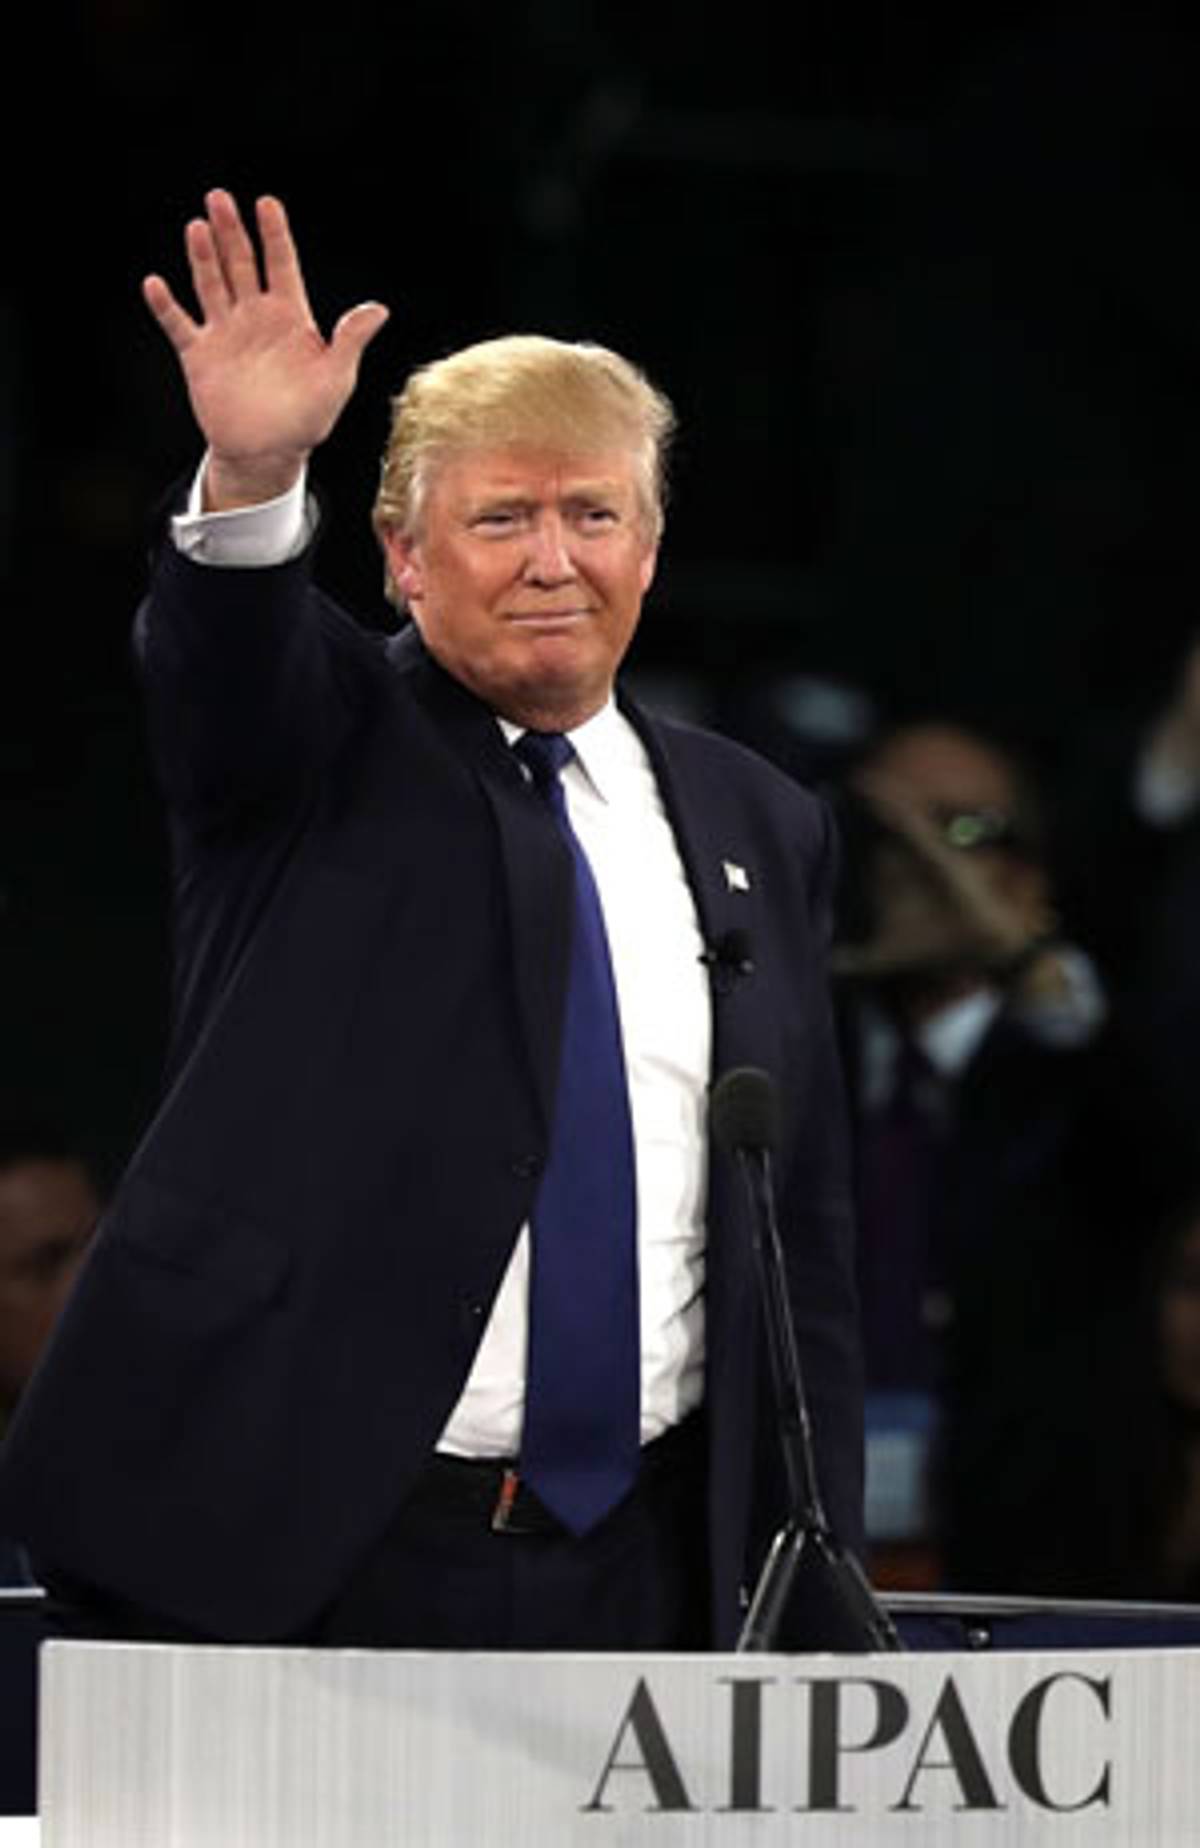 Donald Trump waves after his address to AIPAC on March 21, 2016 in Washington, DC.